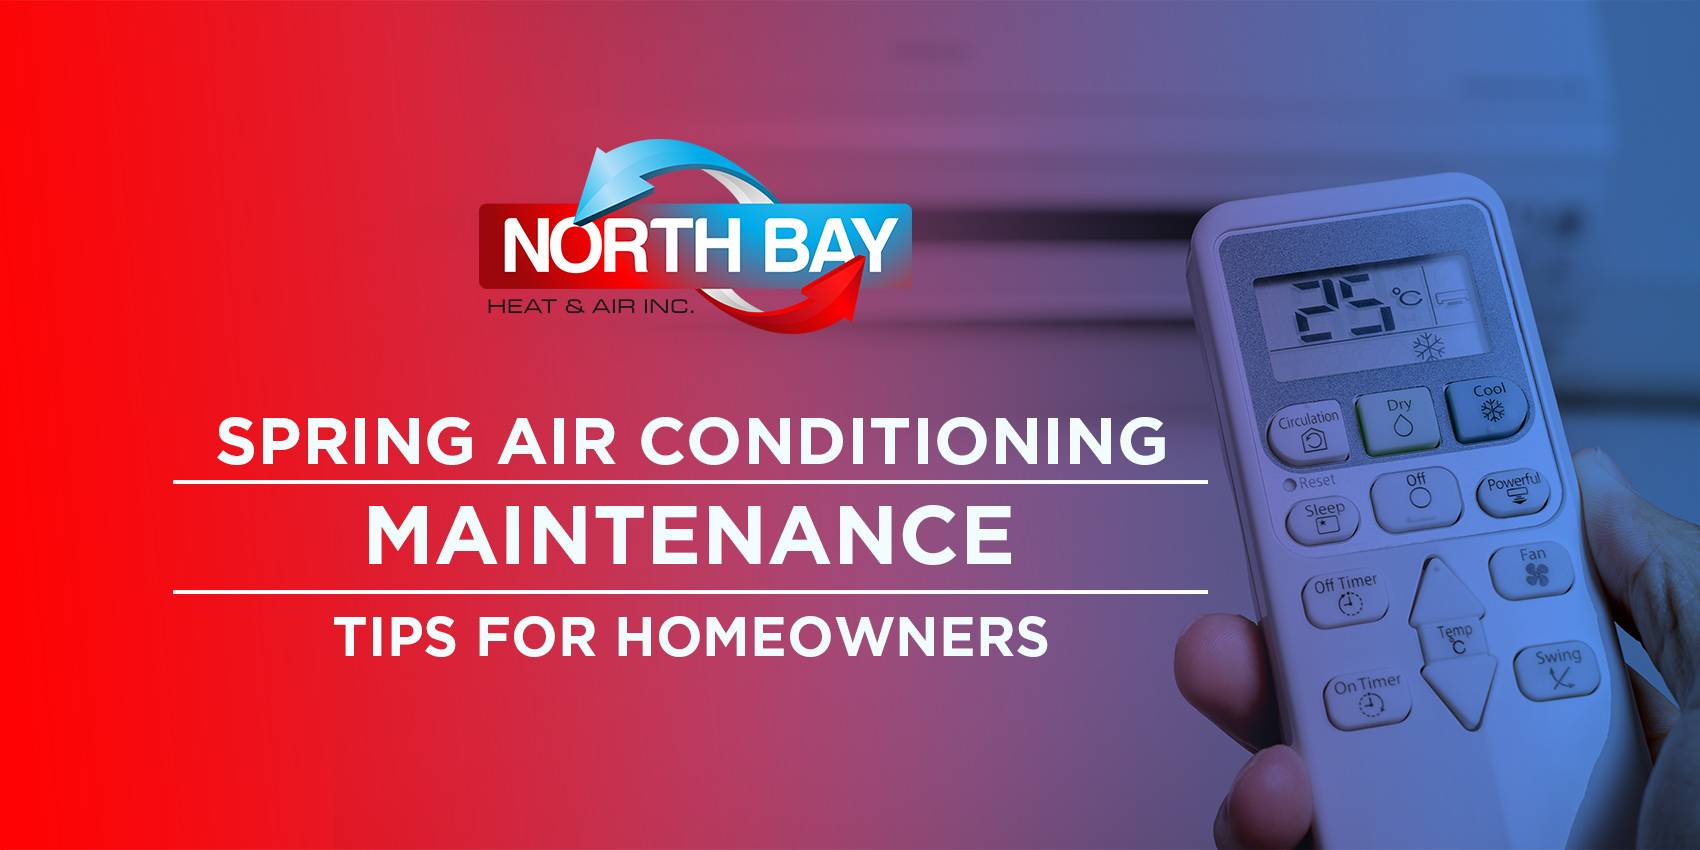 Spring Air Conditioning Maintenance Tips for Homeowners